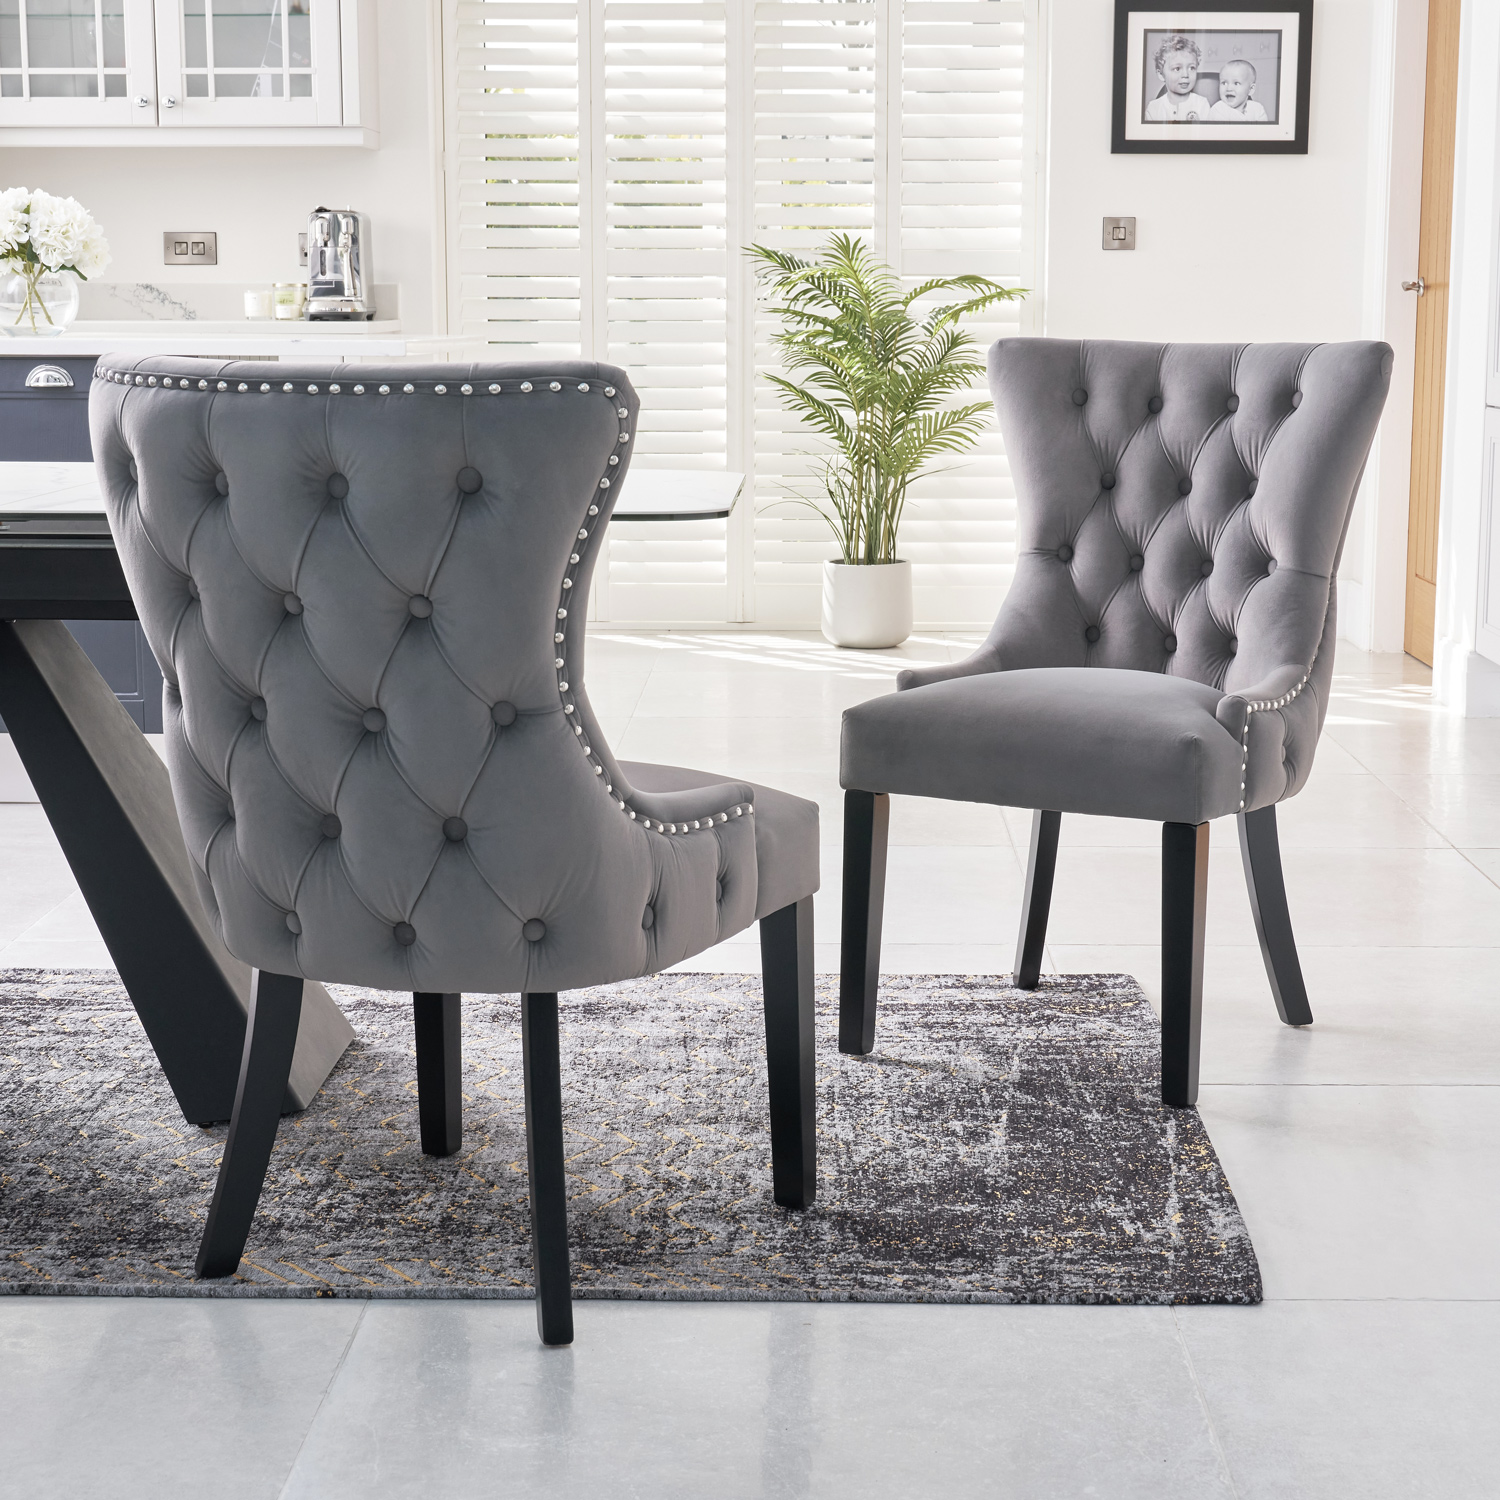 New Knightsbridge Grey Velvet Upholstered Chair With Button Tufted Detailing – Silver Studs